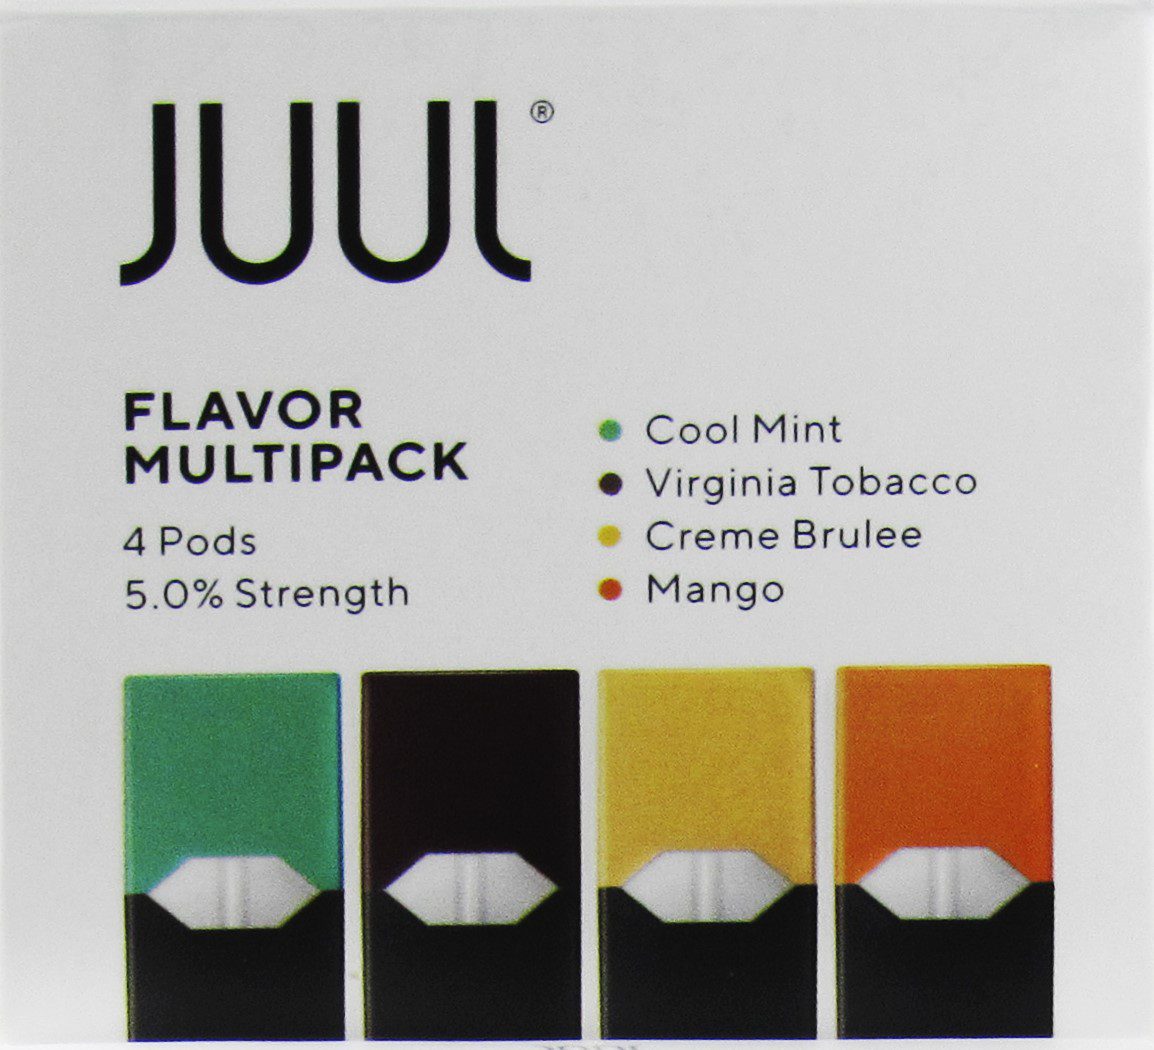 A sign for a Juul flavored multipack. It advertises in four flavors: cool mint, virgina tobacco, creme brulee and mango.